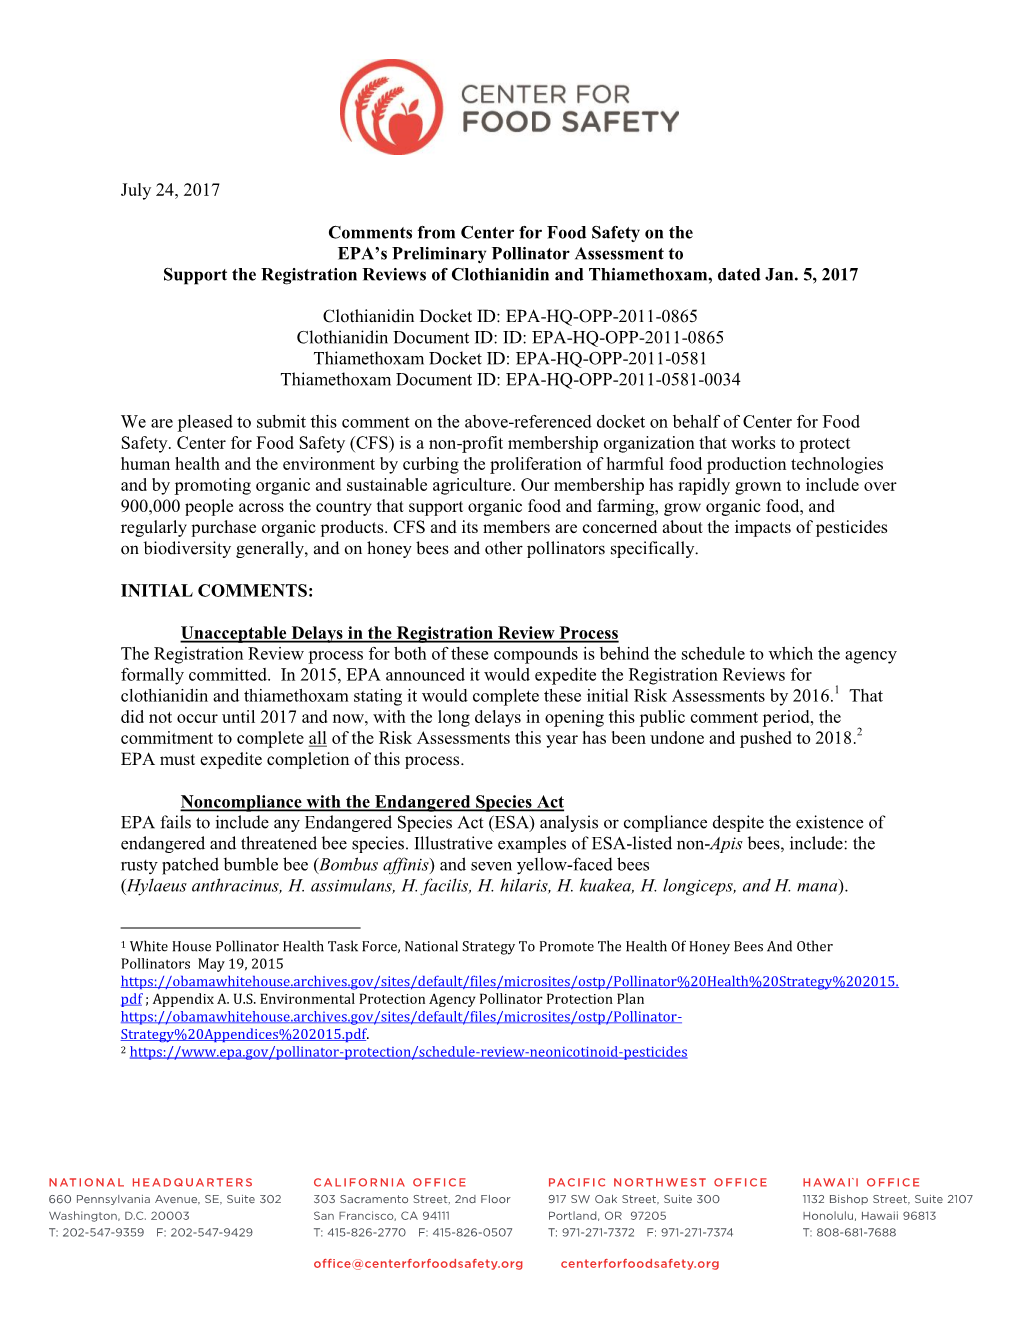 July 24, 2017 Comments from Center for Food Safety on the EPA's Preliminary Pollinator Assessment to Support the Registration